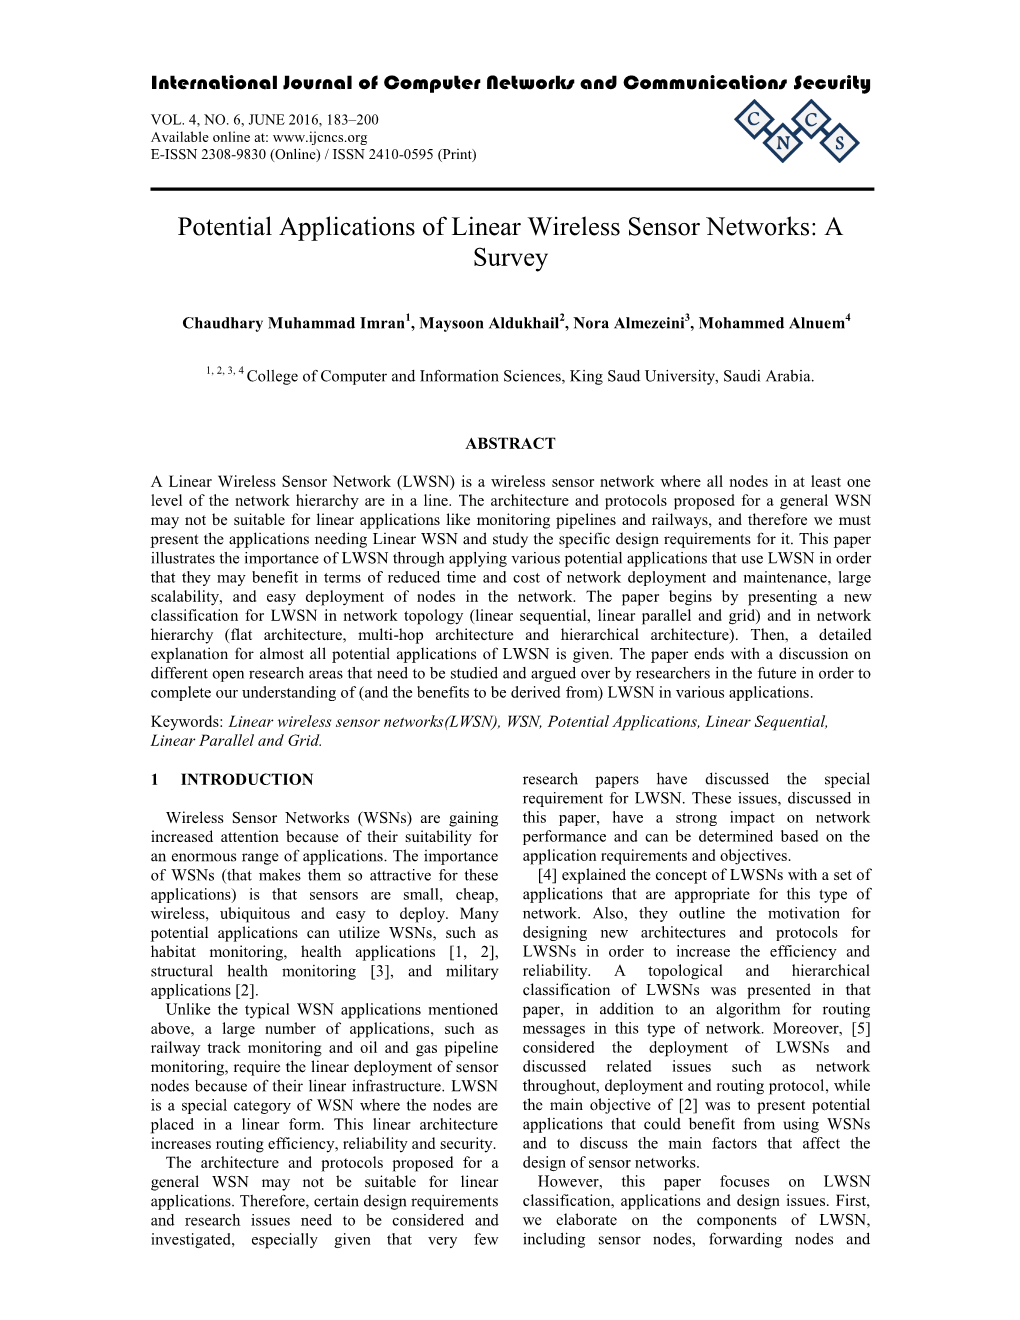 Potential Applications of Linear Wireless Sensor Networks: a Survey